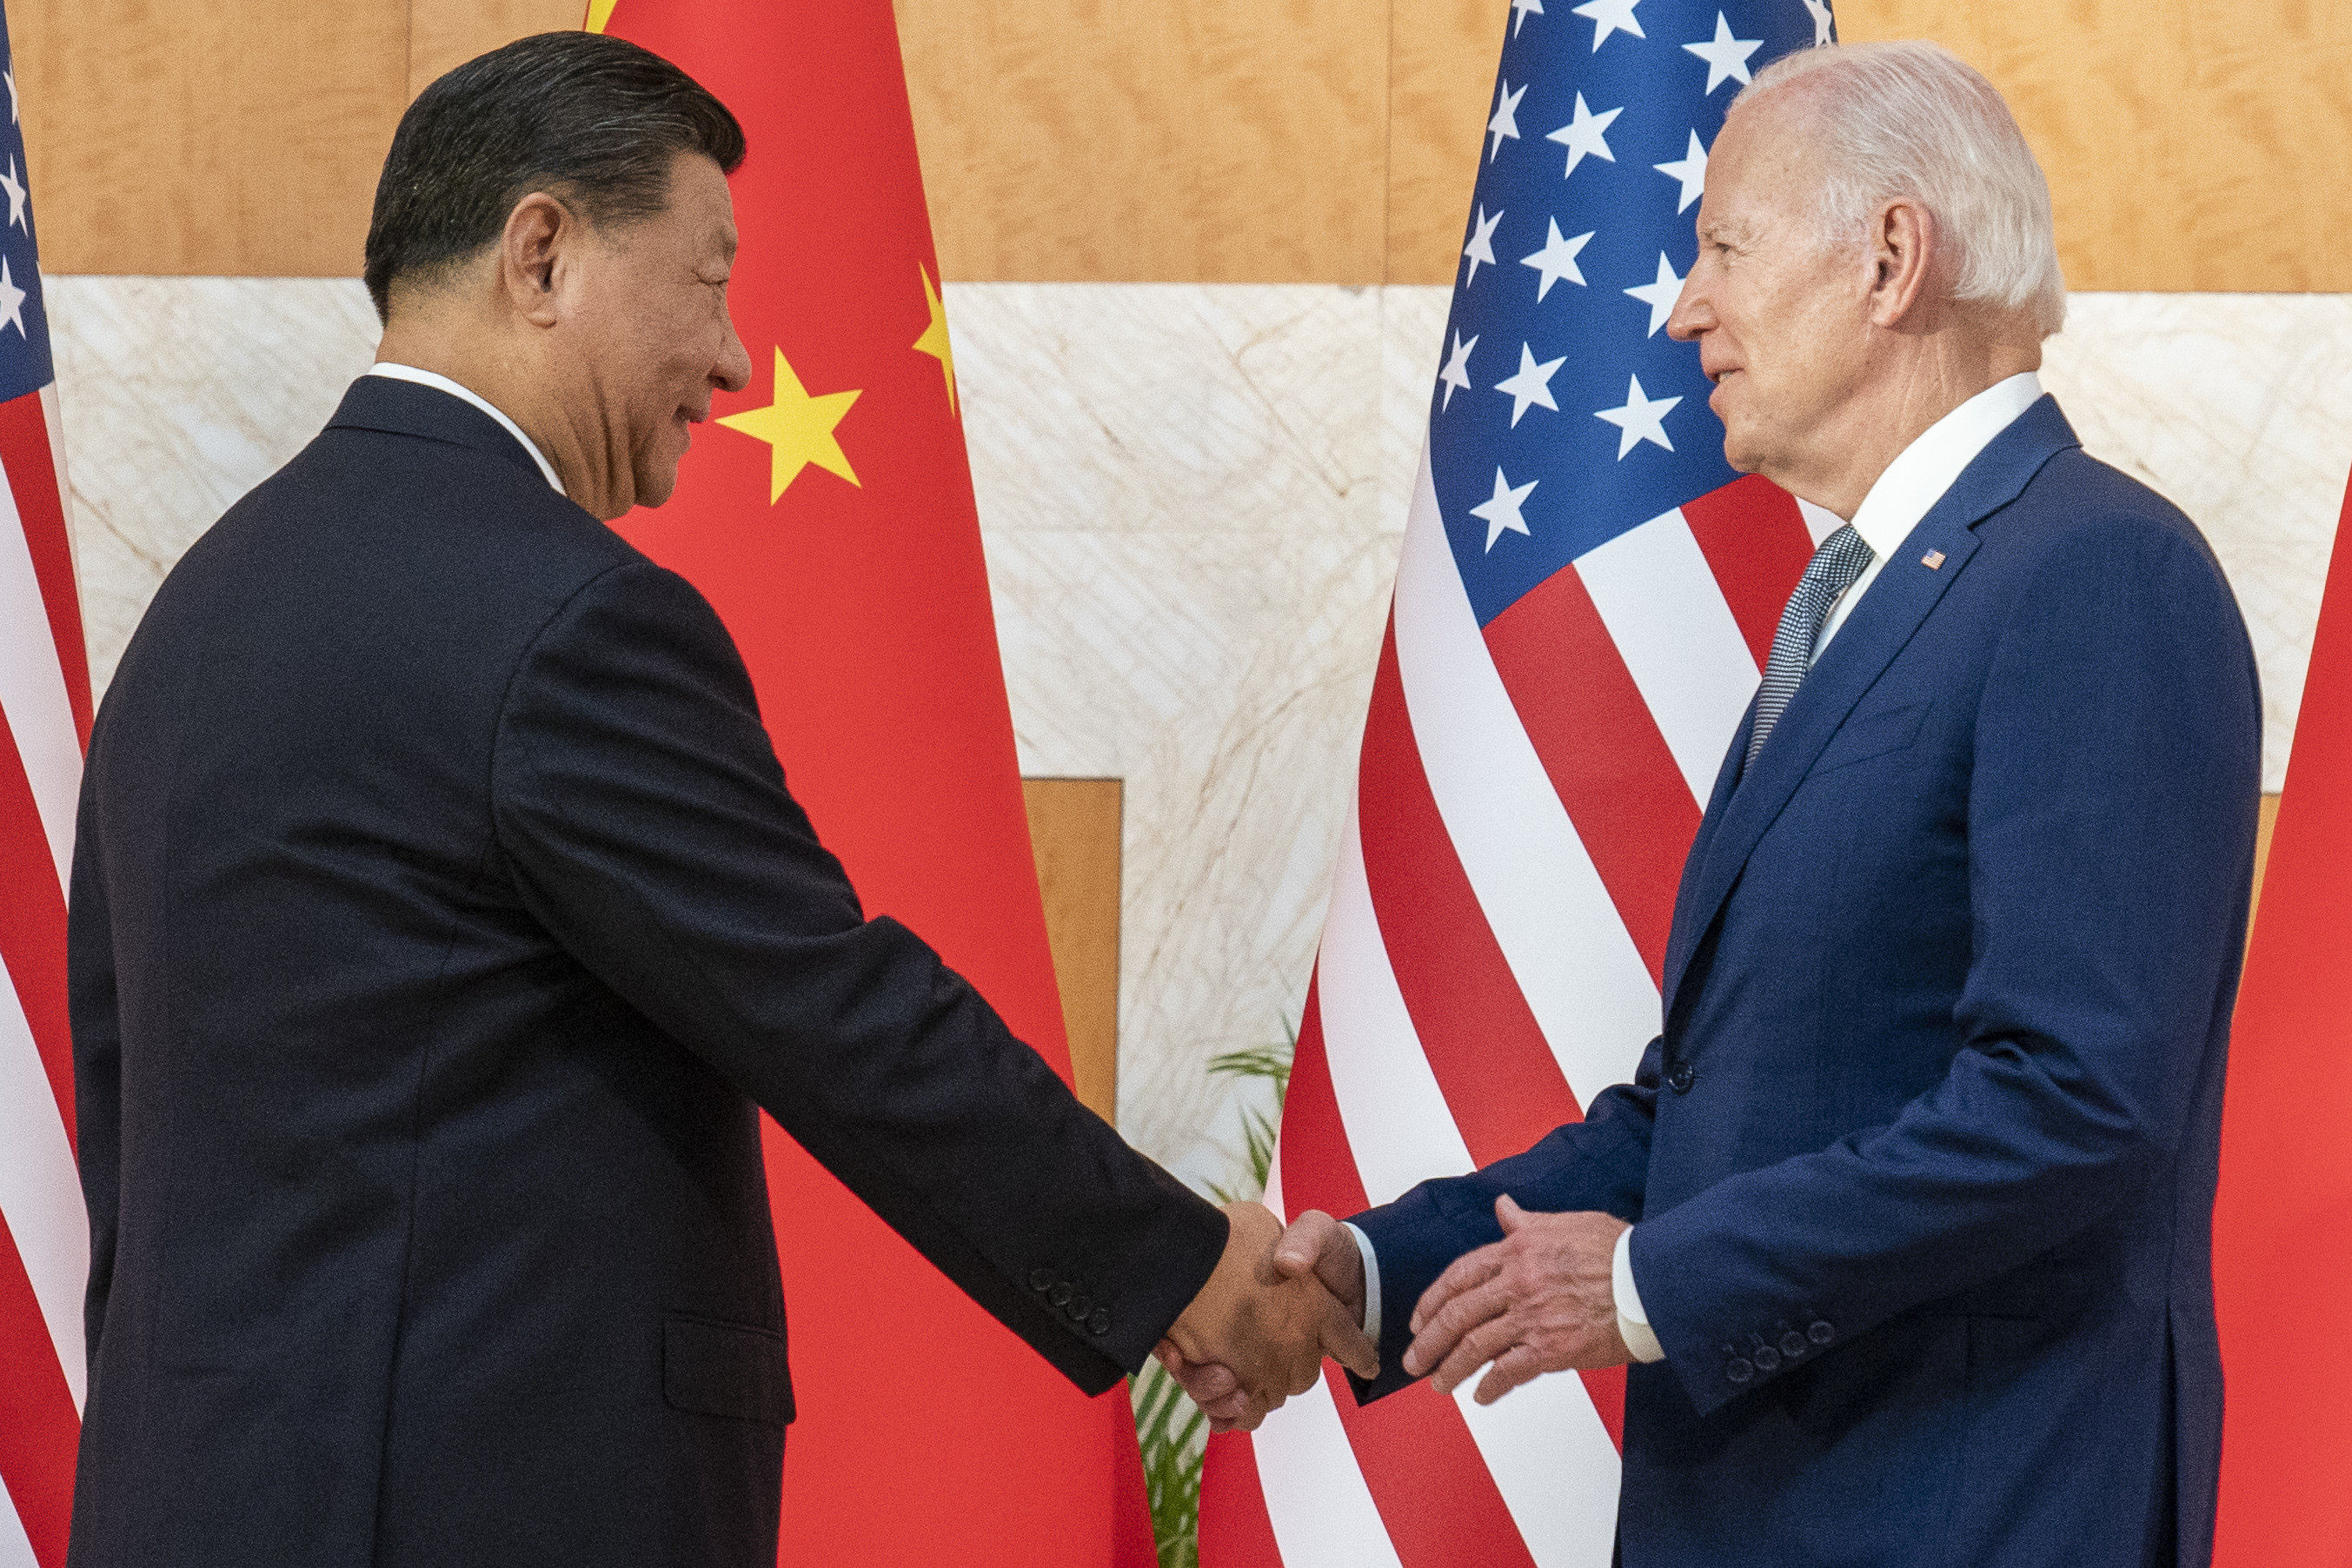 US President Joe Biden, right, and Chinese President Xi Jinping shake hands before a meeting on the sidelines of the G20 summit meeting, on Nov. 14, 2022, in Bali, Indonesia. Photo: AP